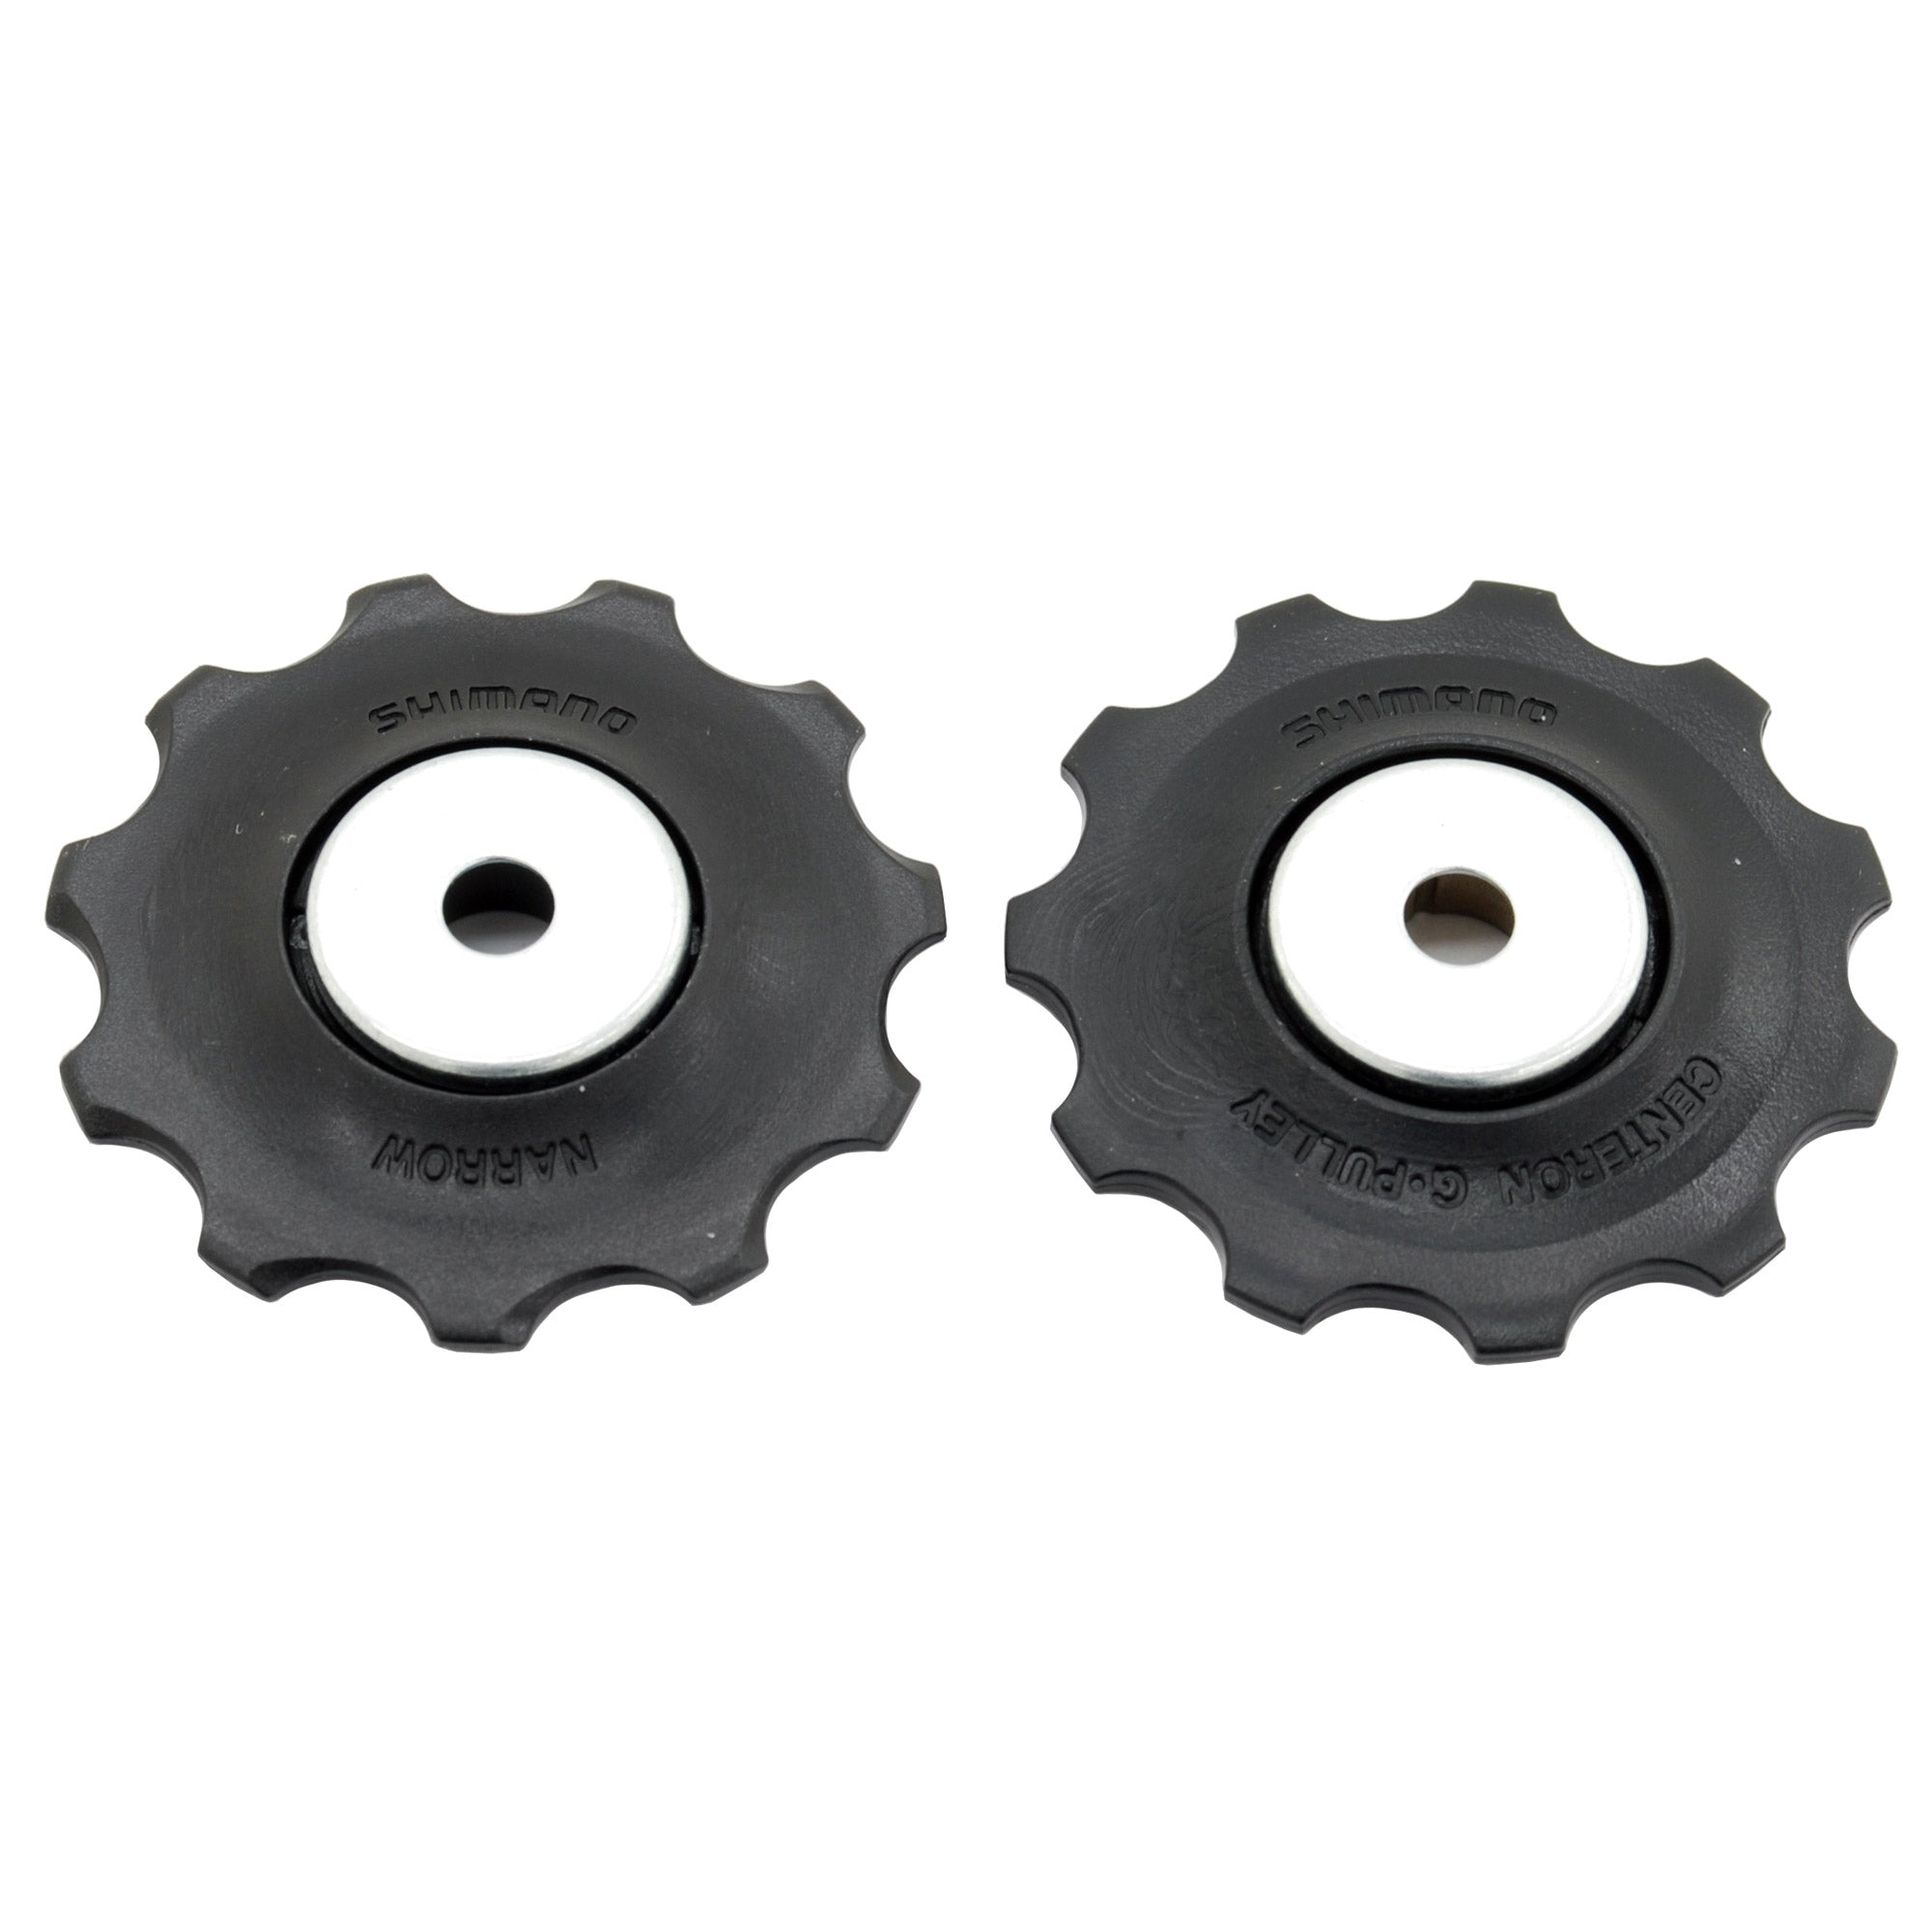 SHIMANO RD-M370 Tension & Guide Pulley Set